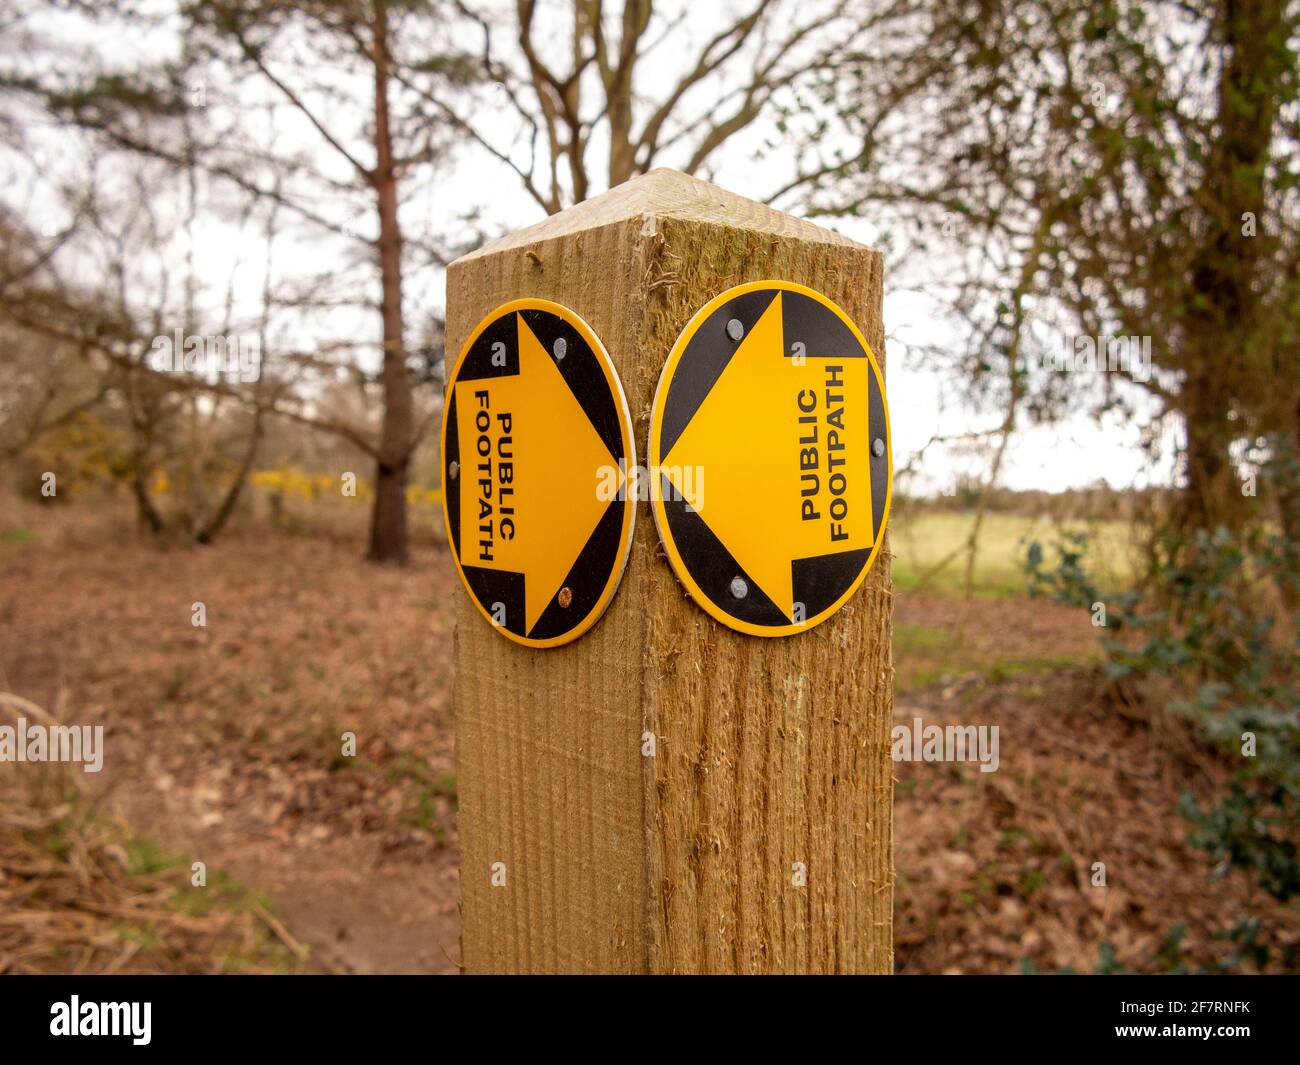 A new public footpath sign in the form of yellow arrows on discs mounted on a wooden post Stock Photo